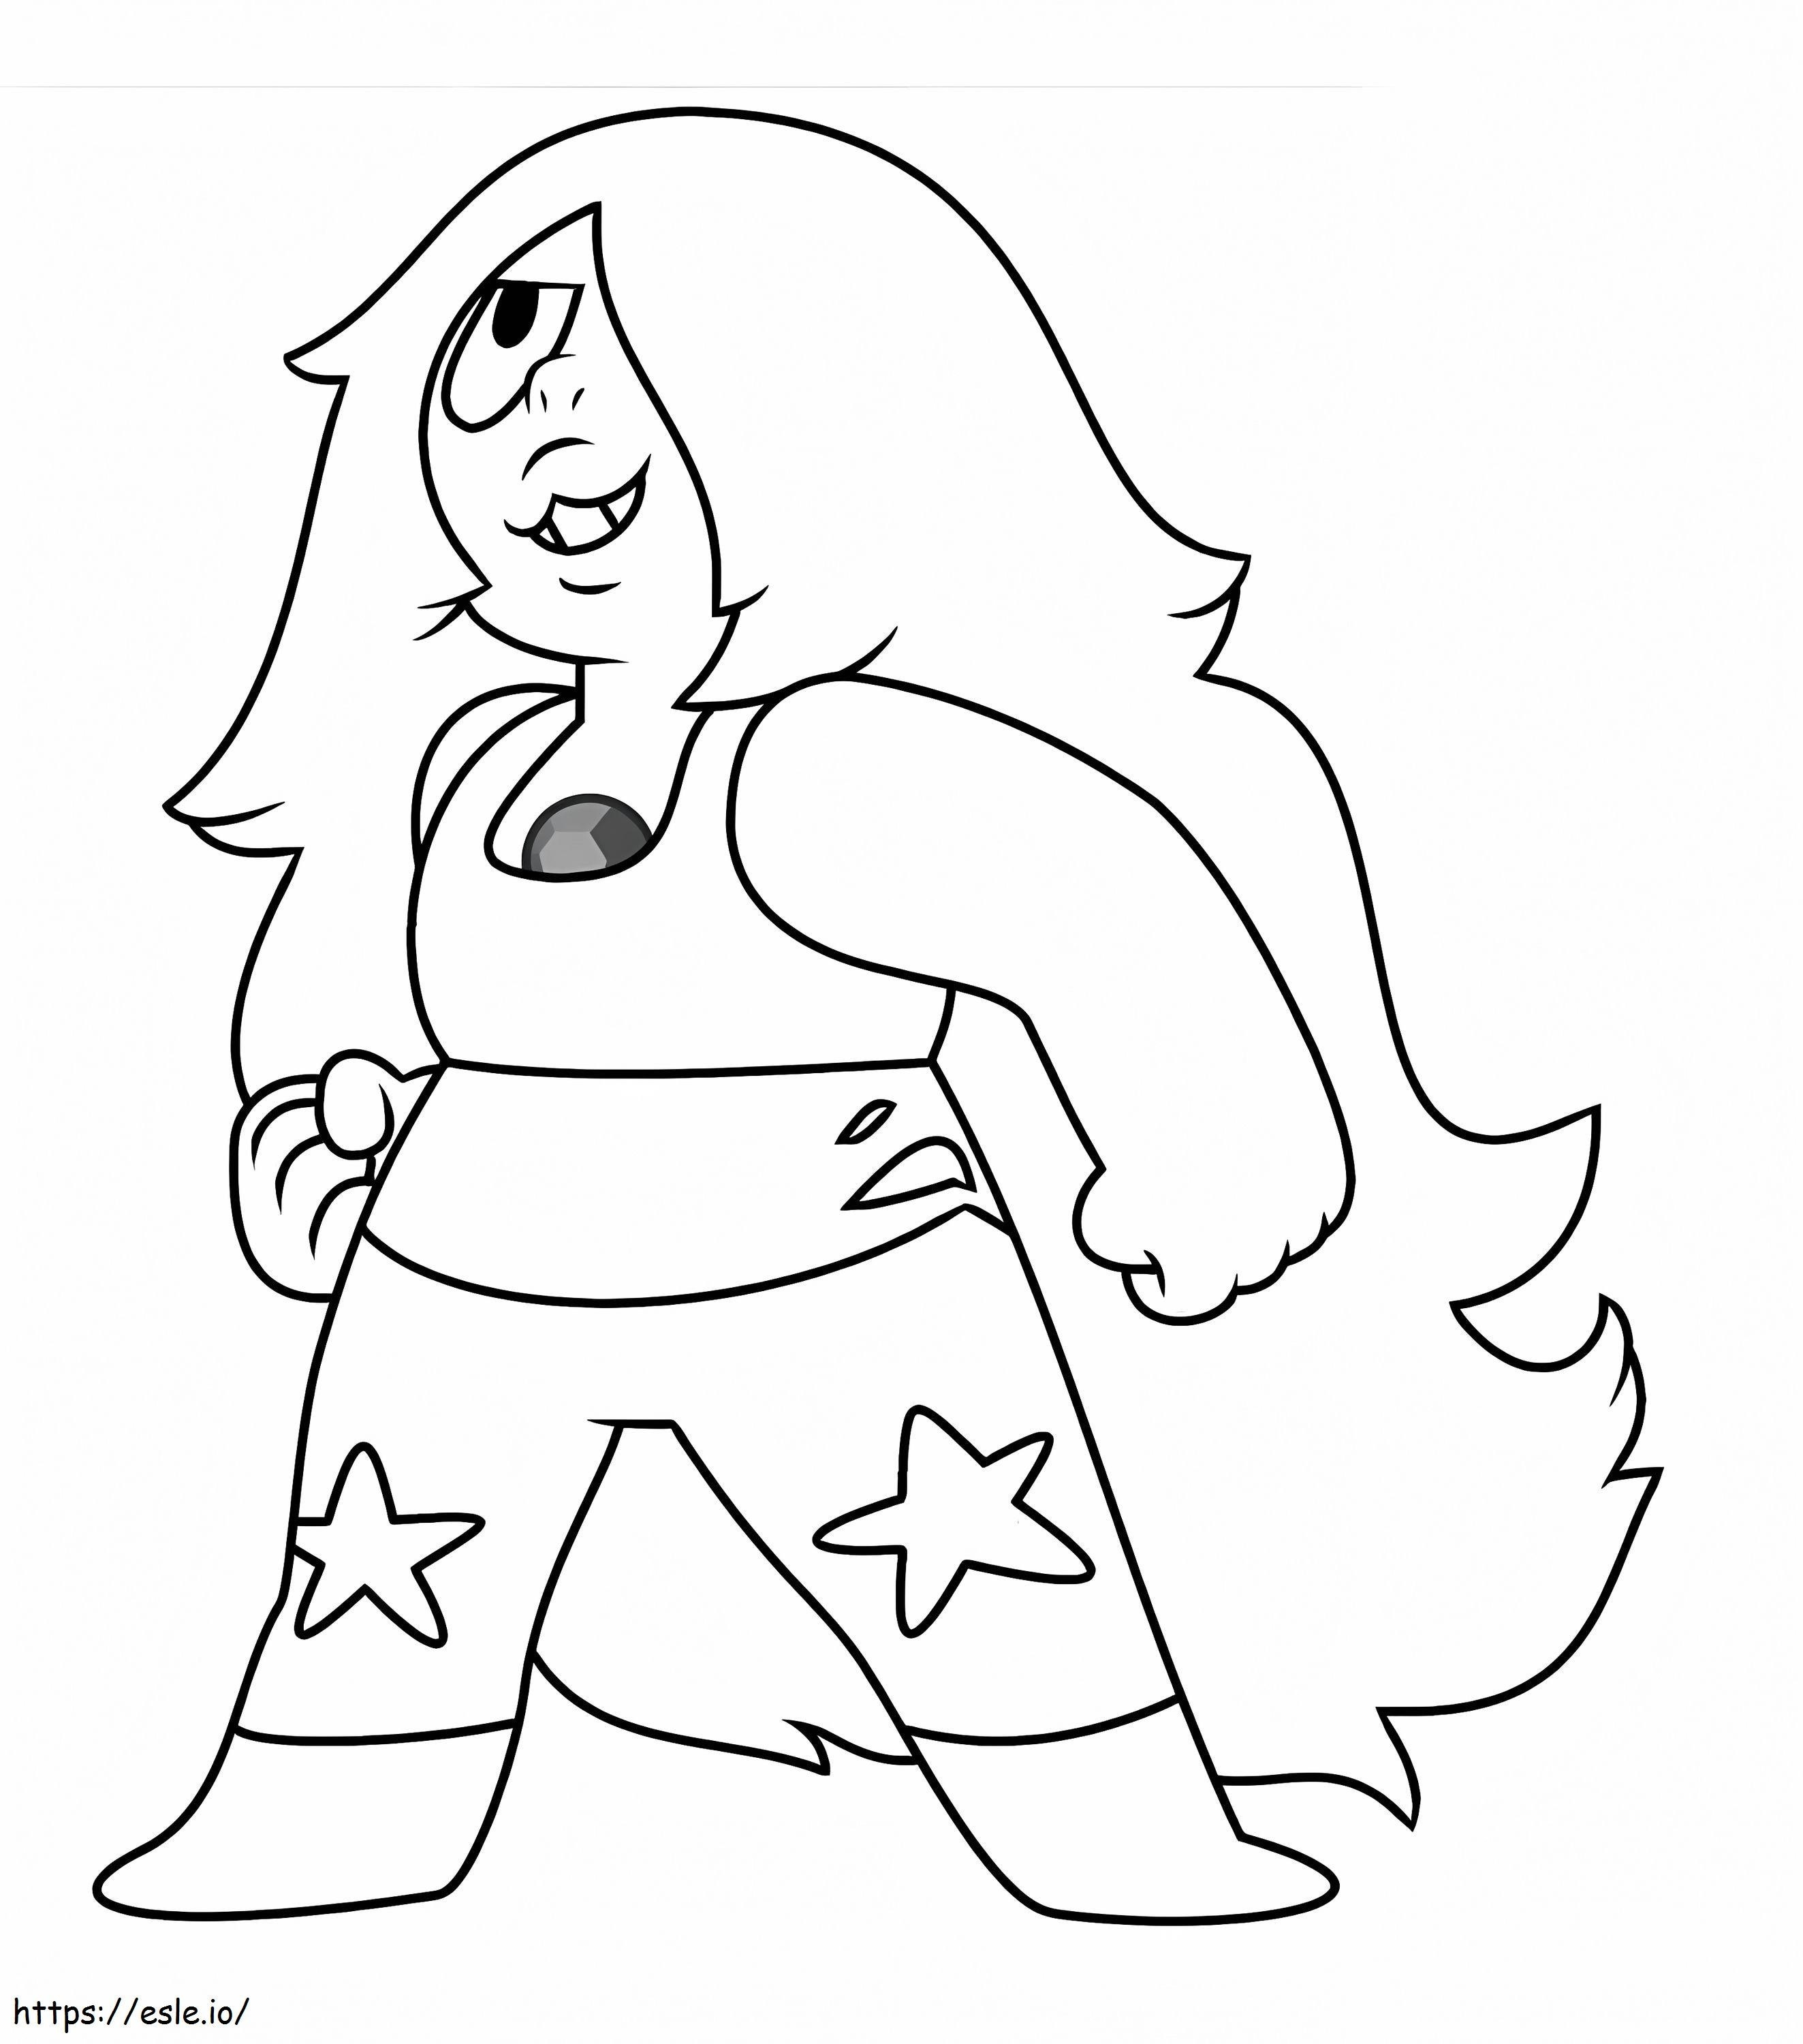 Amethyst Smiling coloring page